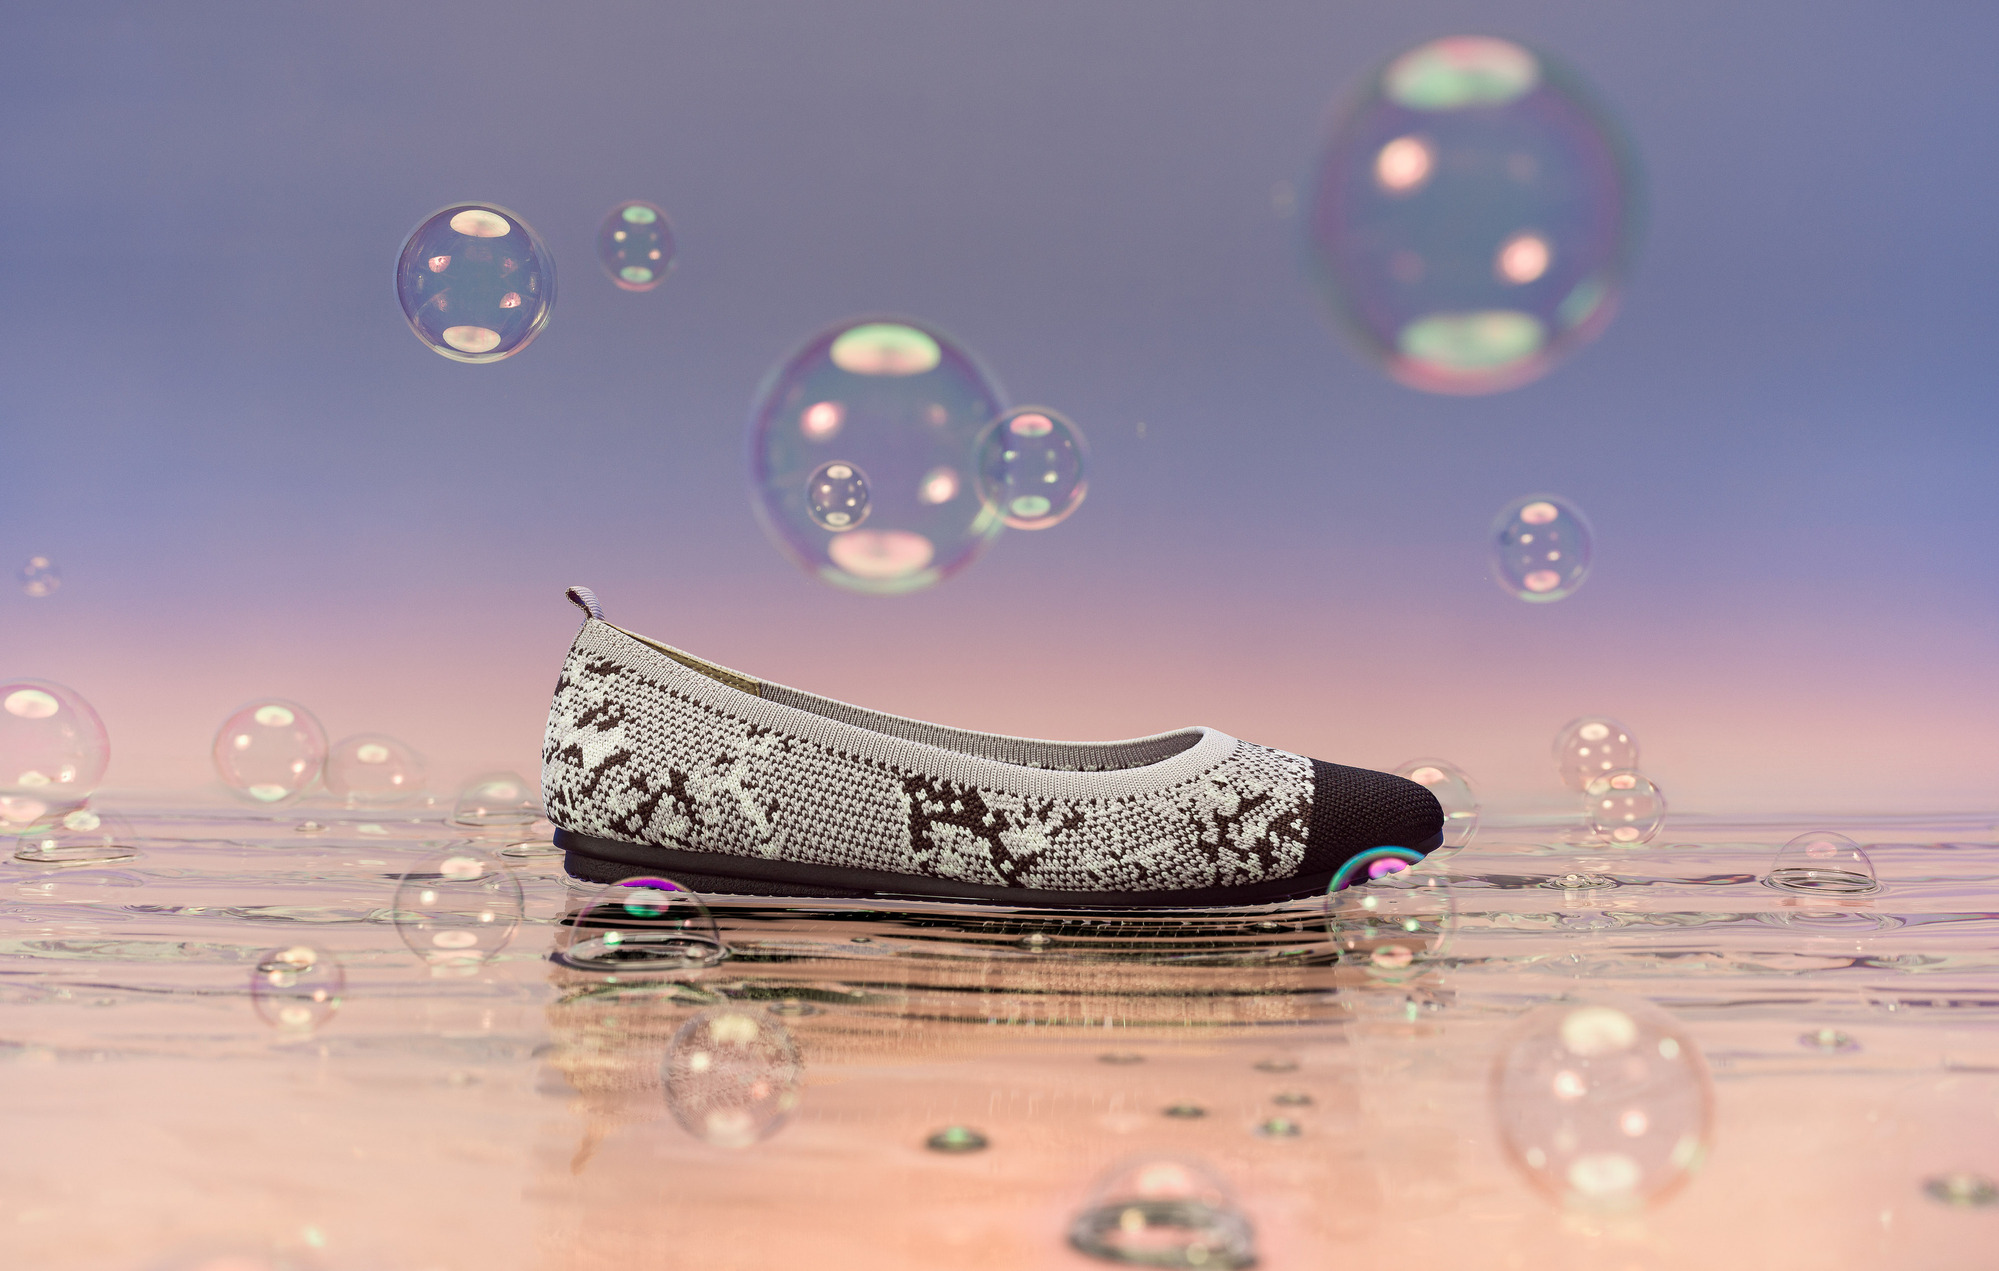 Commercial and advertising product photography for Vince Camuto washable footwear and accessories by Los Angeles photographer Timothy Hogan